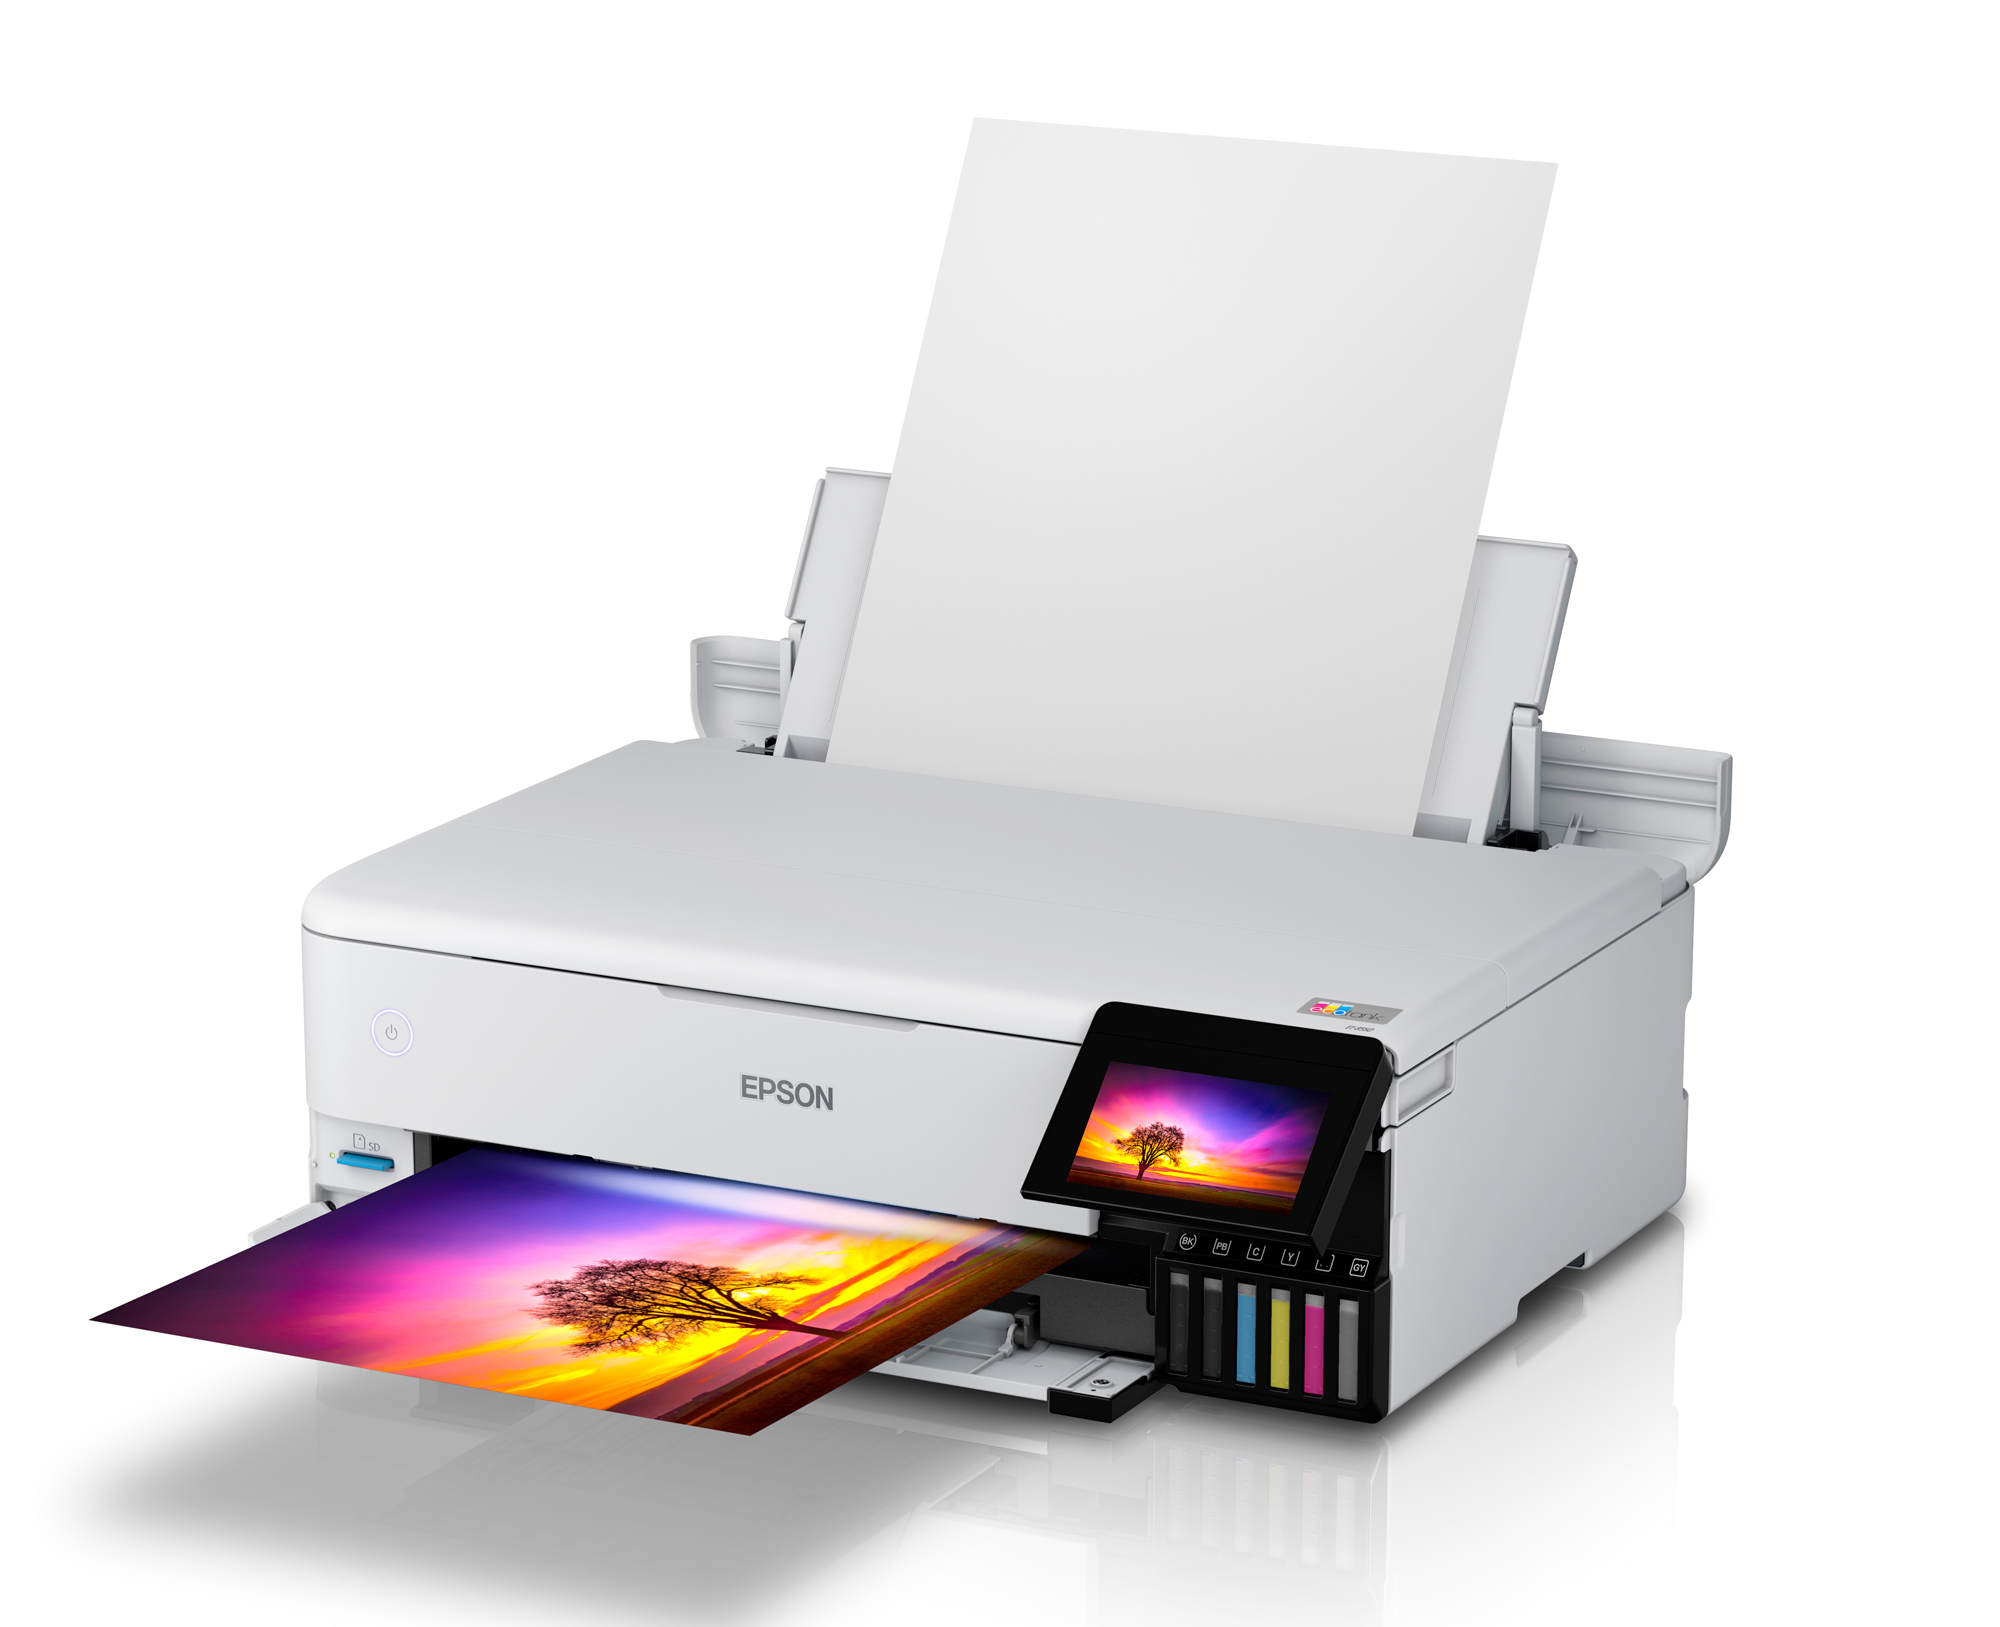 Epson’s NEW EcoTank Printers Things Are About to Change PhotoPXL